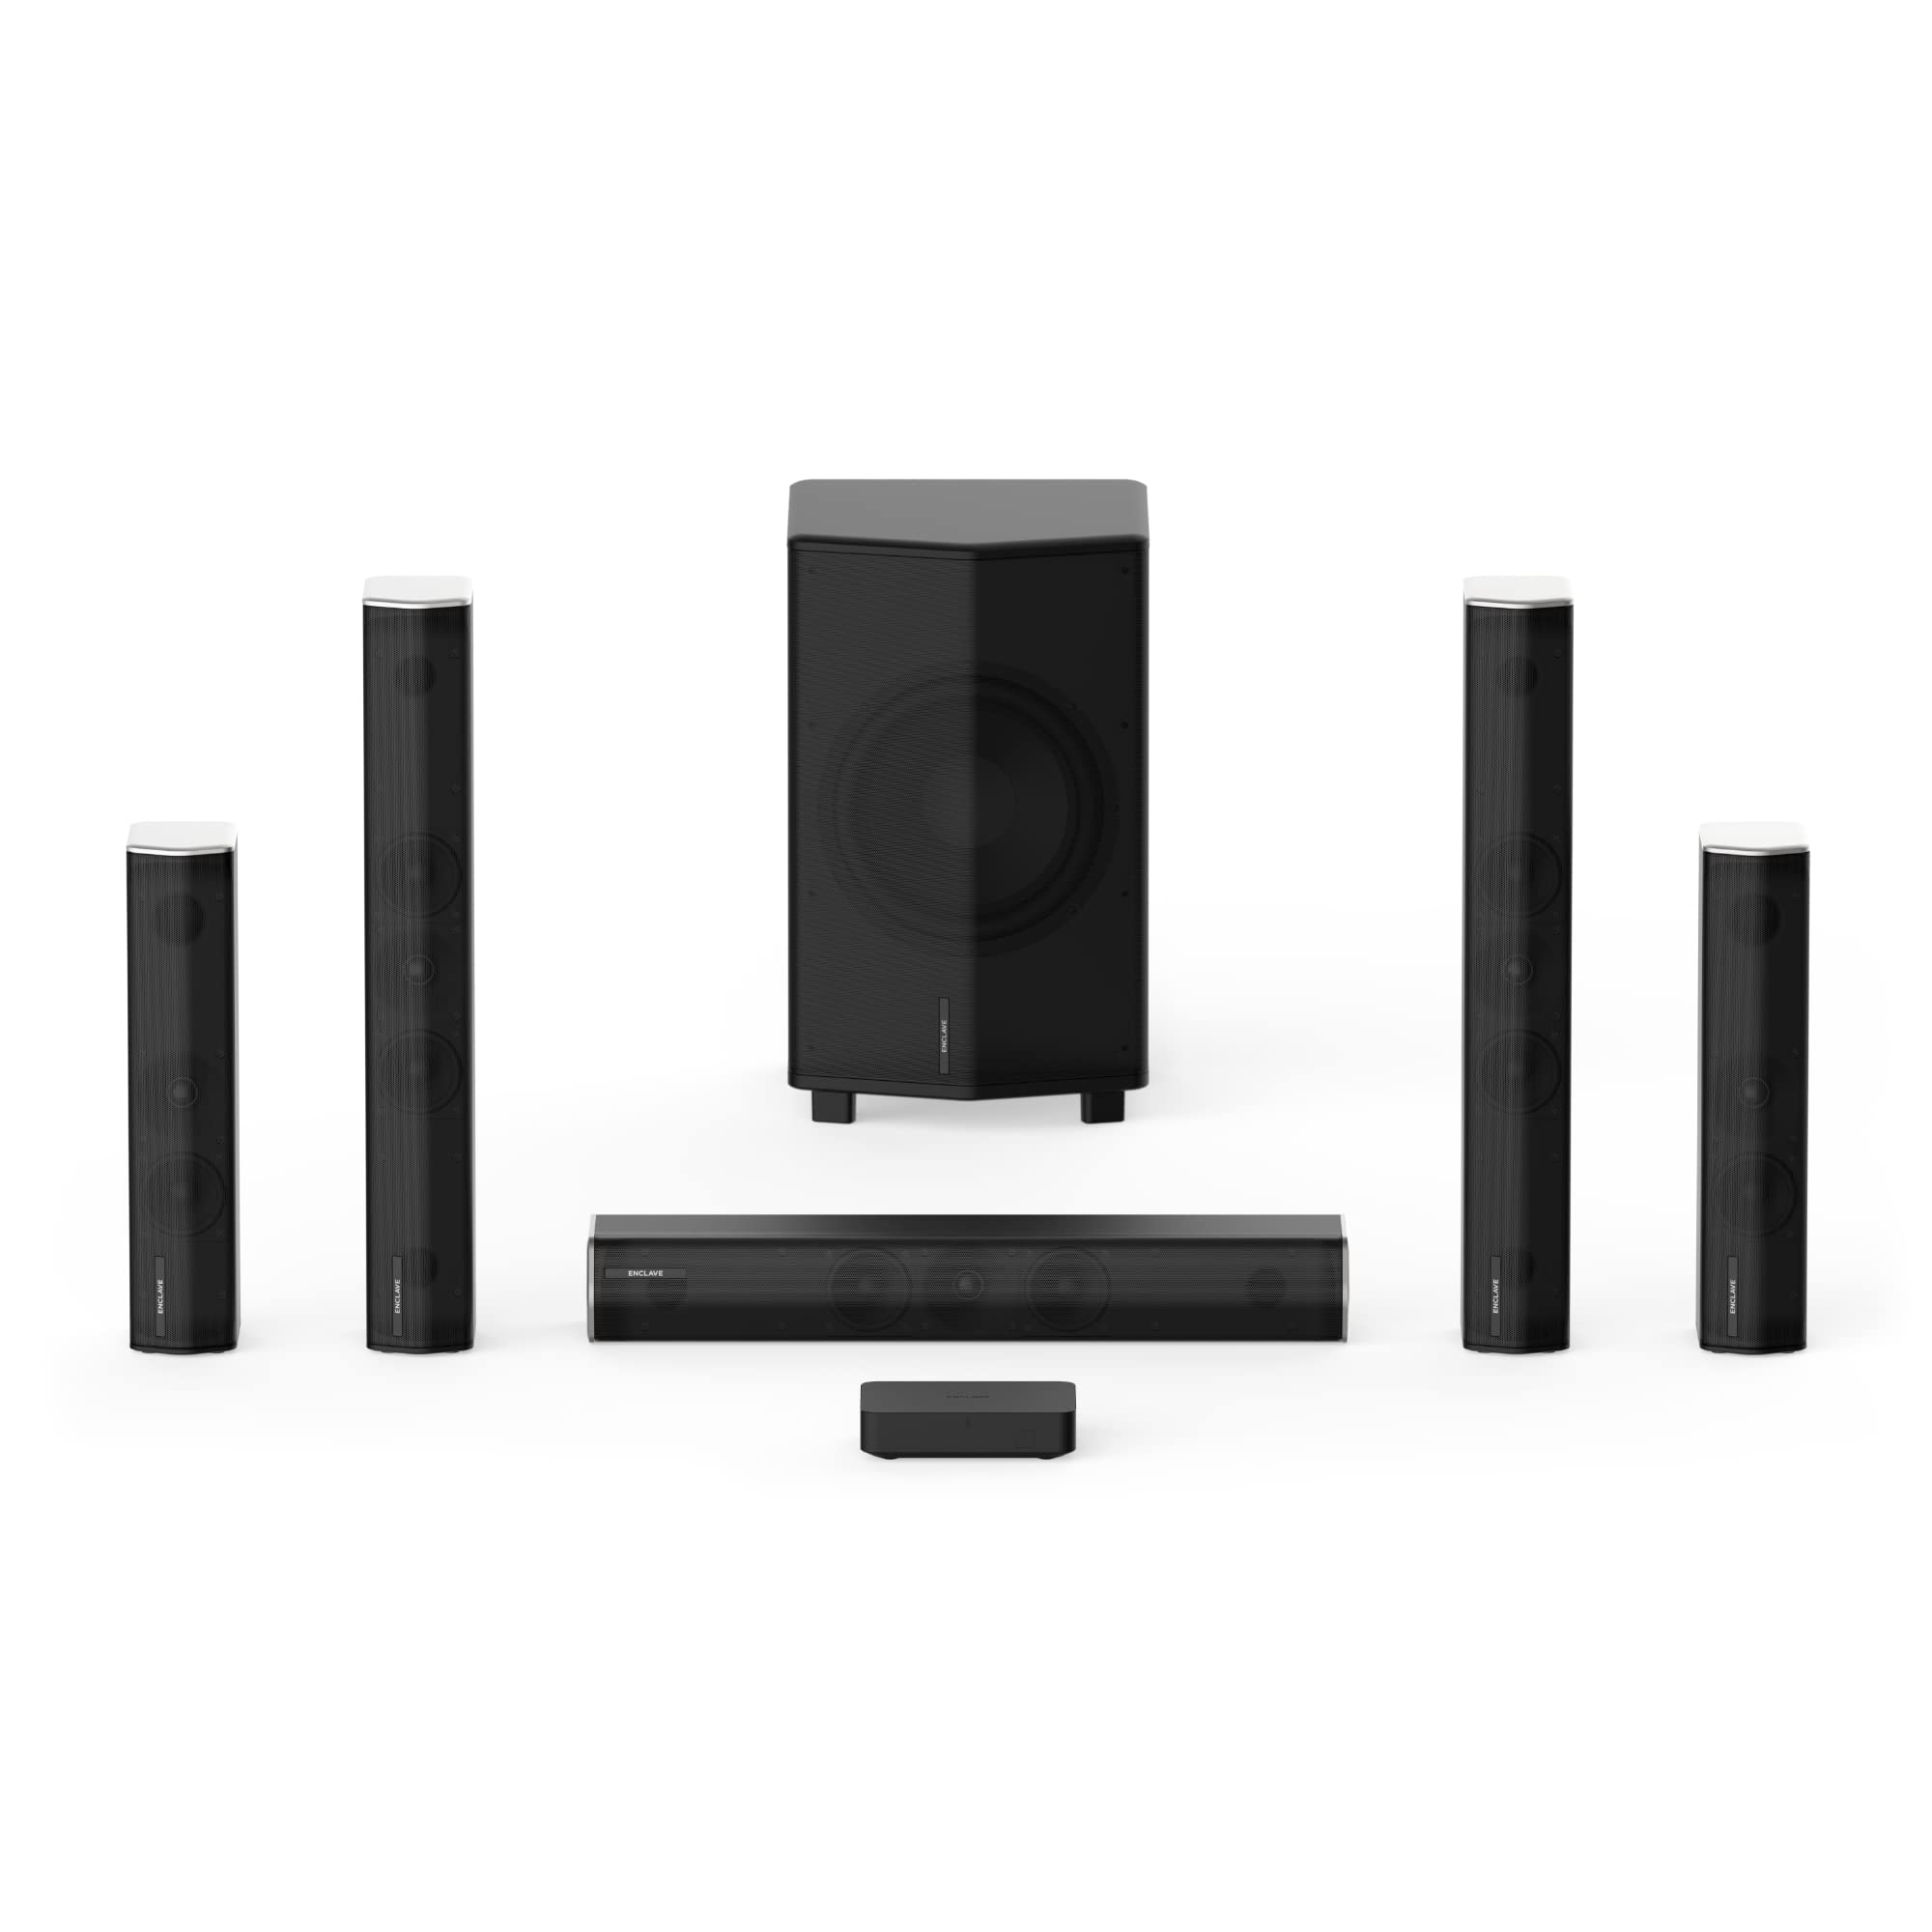  Enclave Audio CineHome PRO - 5.1 Wireless Plug and Play Home Theater Surround Sound System - THX, Dolby, DTS WiSA Certified - Includes 5 Active Wireless Speakers, 10-inch Subwoofer & CineHub Transmitter...